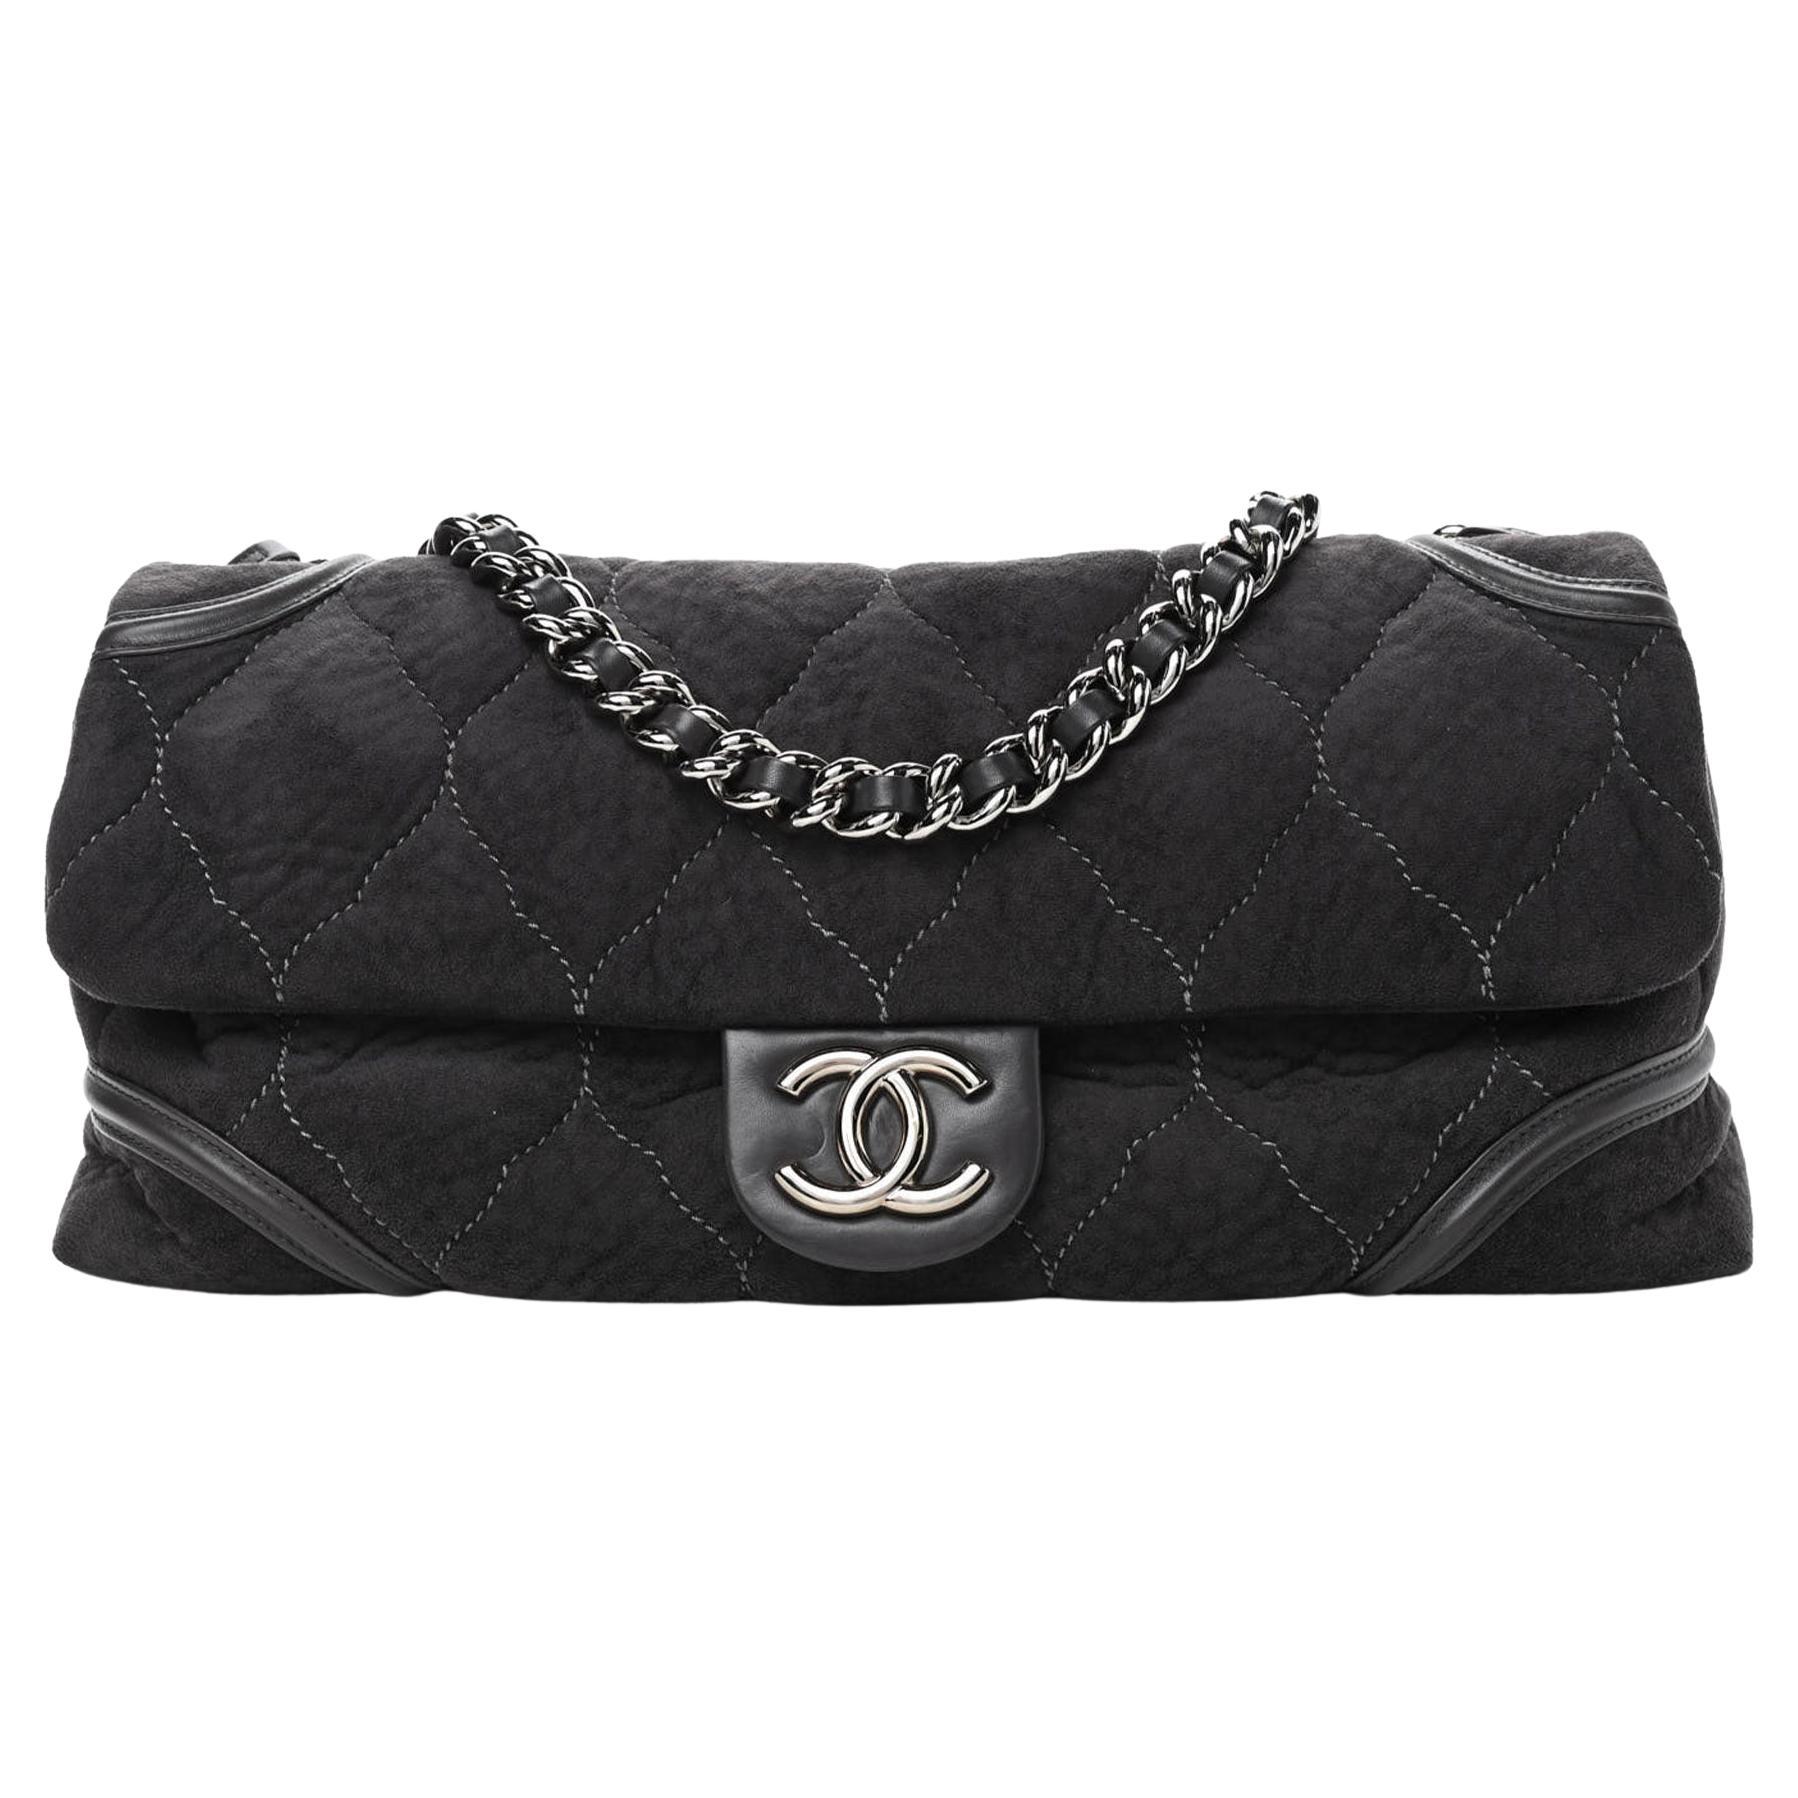 Chanel 2009 Vintage Grey Suede Shearling Extra Large Maxi Flap Bag In Good Condition For Sale In Miami, FL